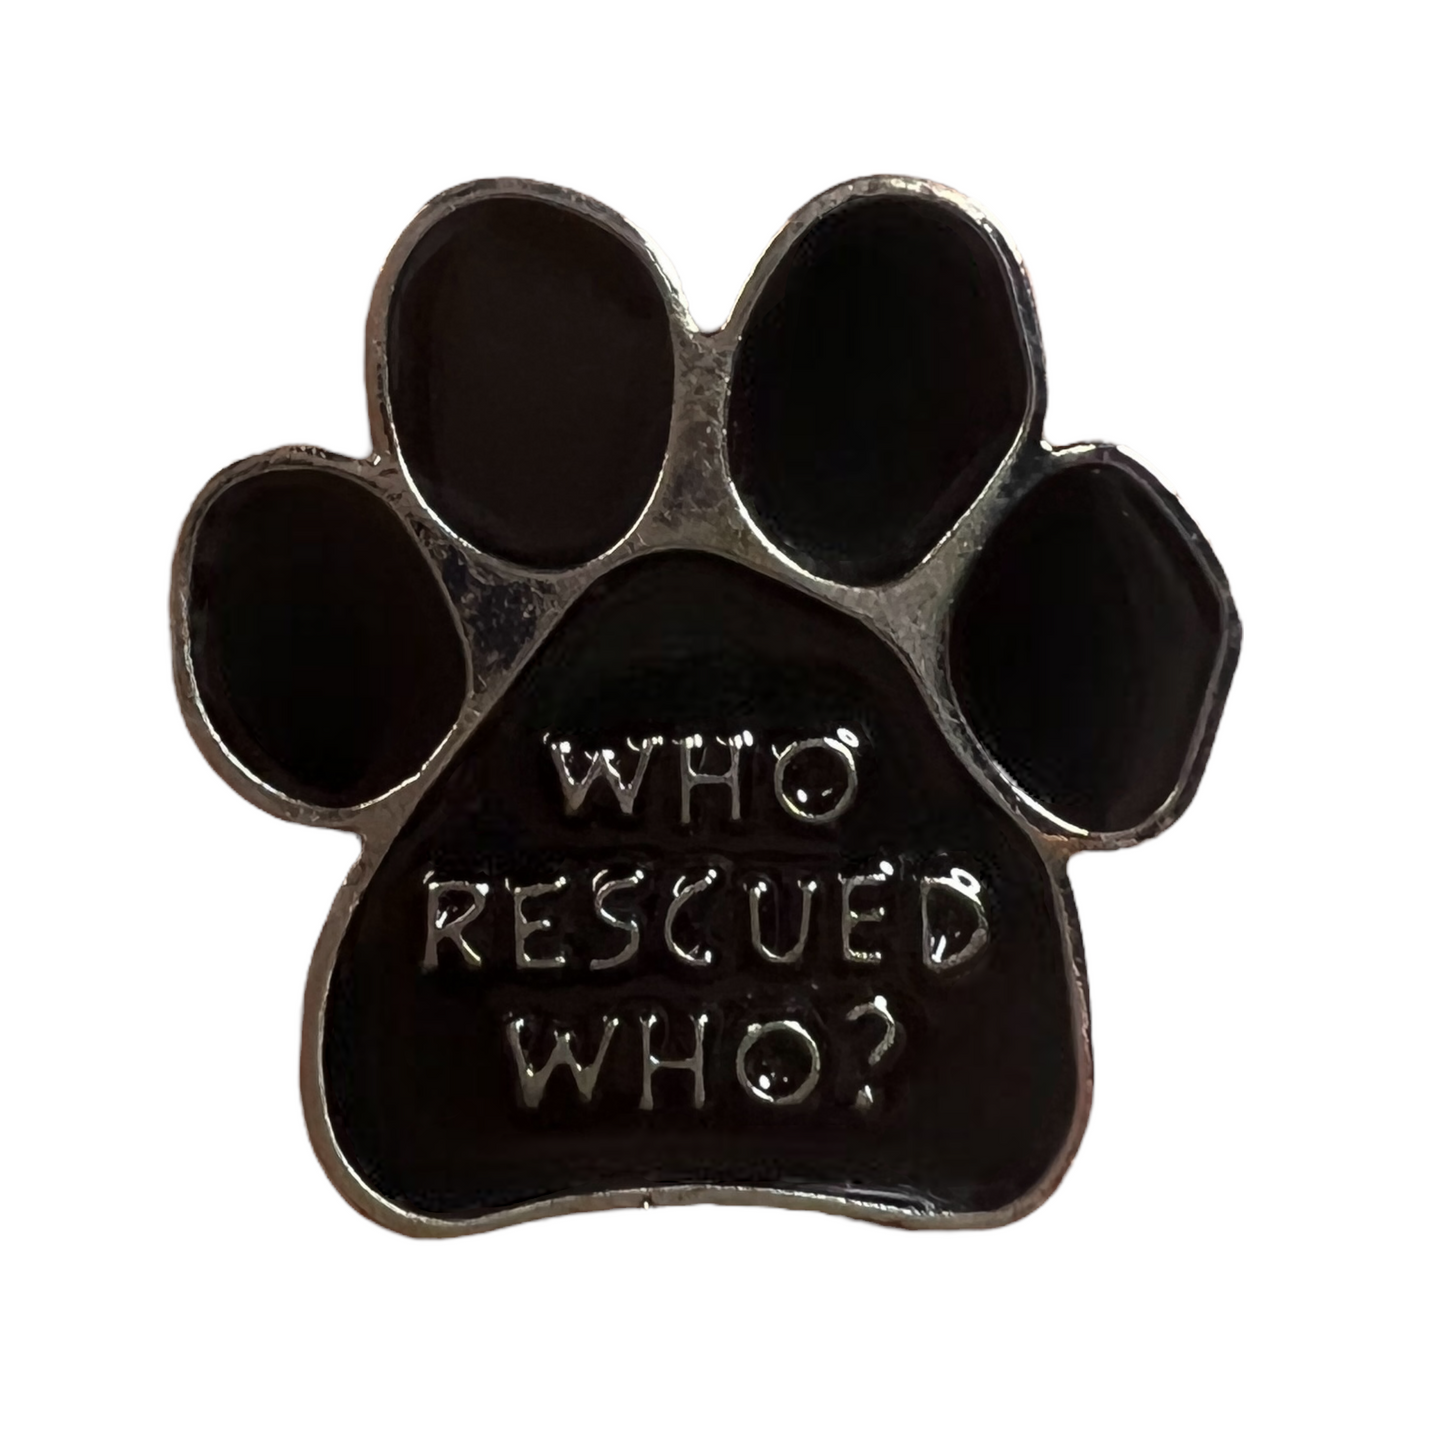 Pin — 'Dog Paws'  SPIRIT SPARKPLUGS Who Rescued Who?  